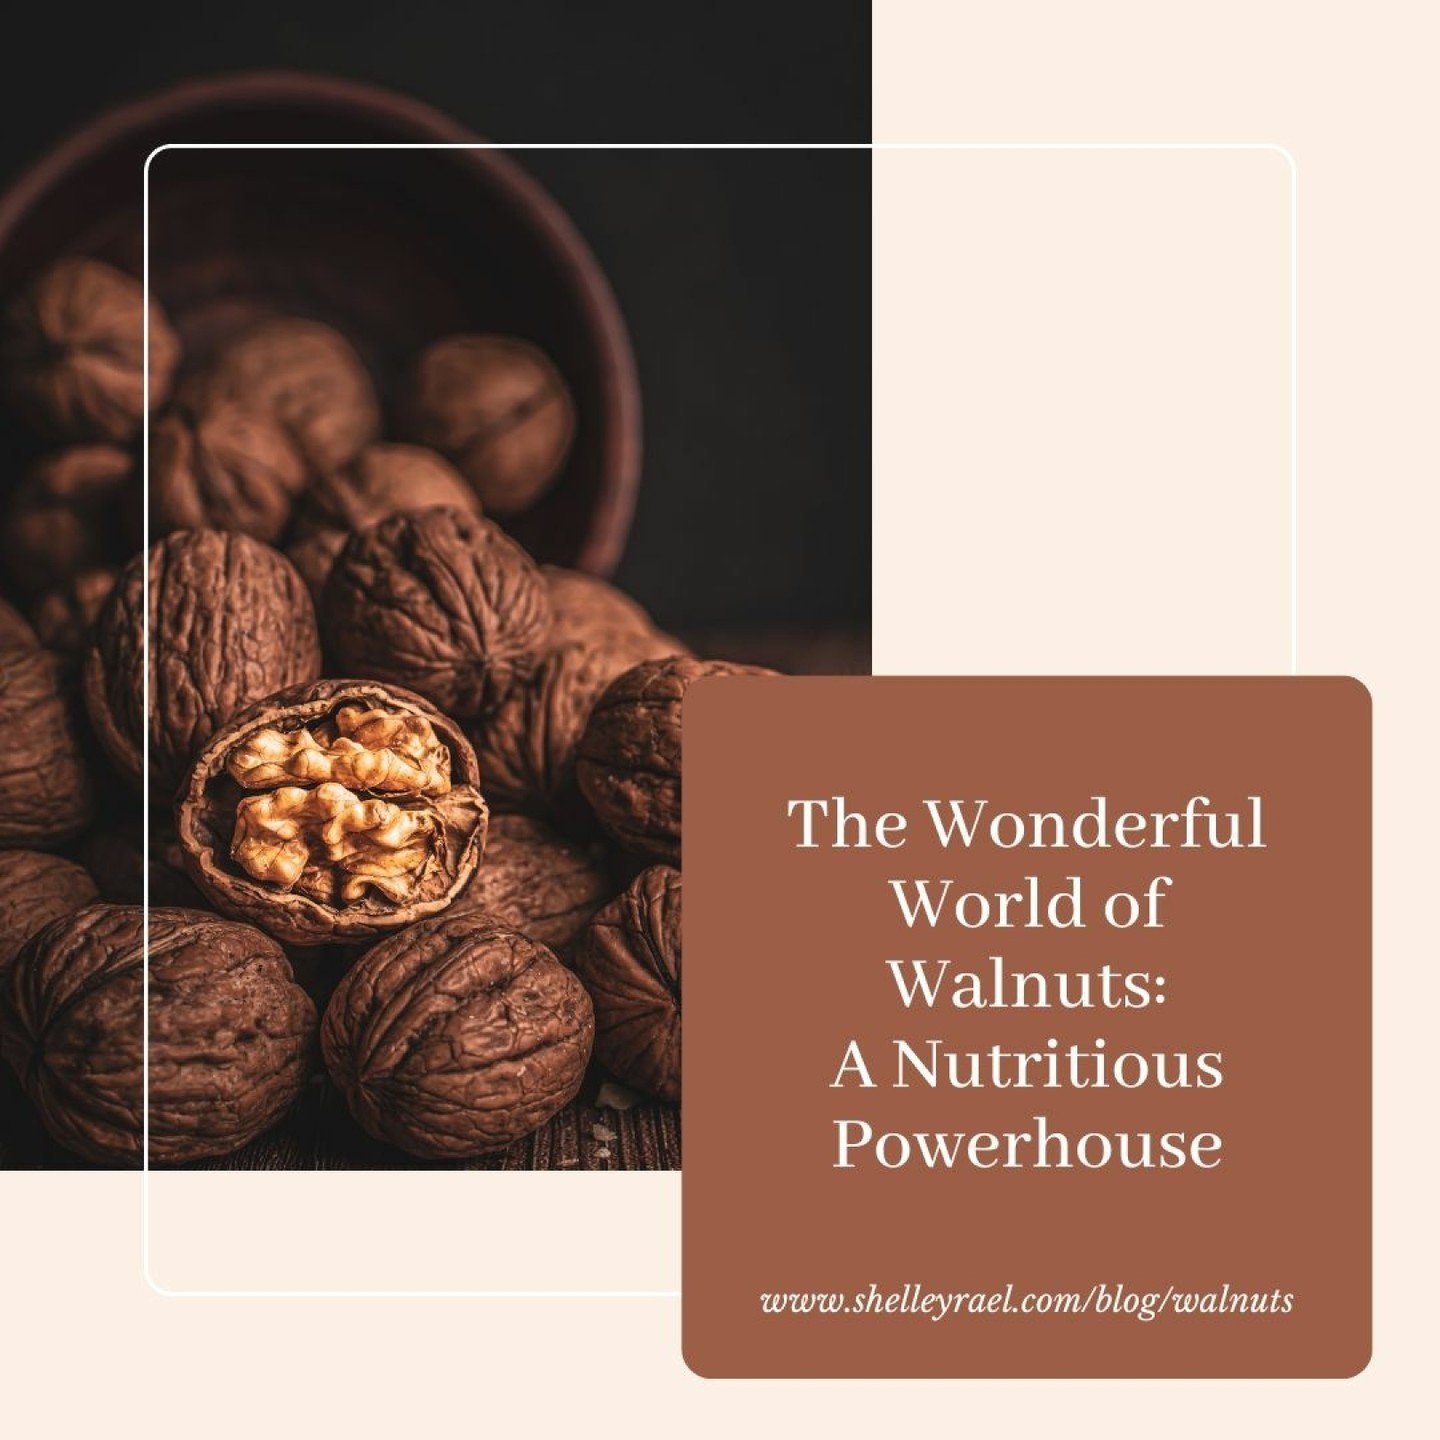 💪Do you know the secret power of walnuts yet? 

💛These little nuts are packed with incredible health benefits, making them a must-have in any diet. 

🧠Not only are walnuts rich in omega-3 fatty acids, but they are also a powerhouse of antioxidants